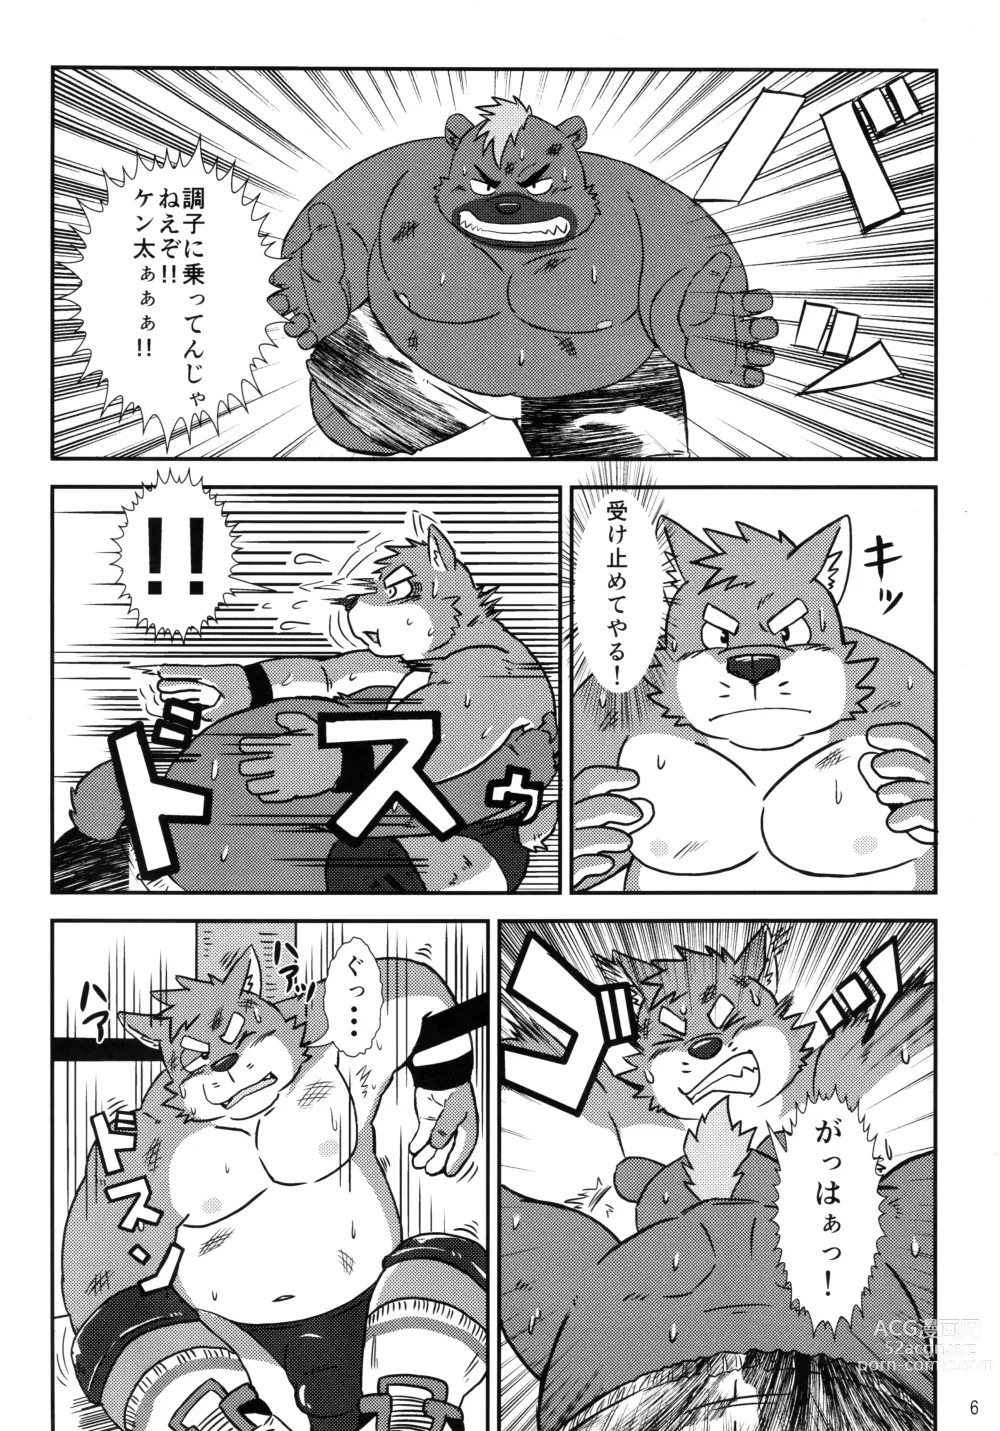 Page 7 of doujinshi BFW -BEAST FIGHTER WRESTLING-